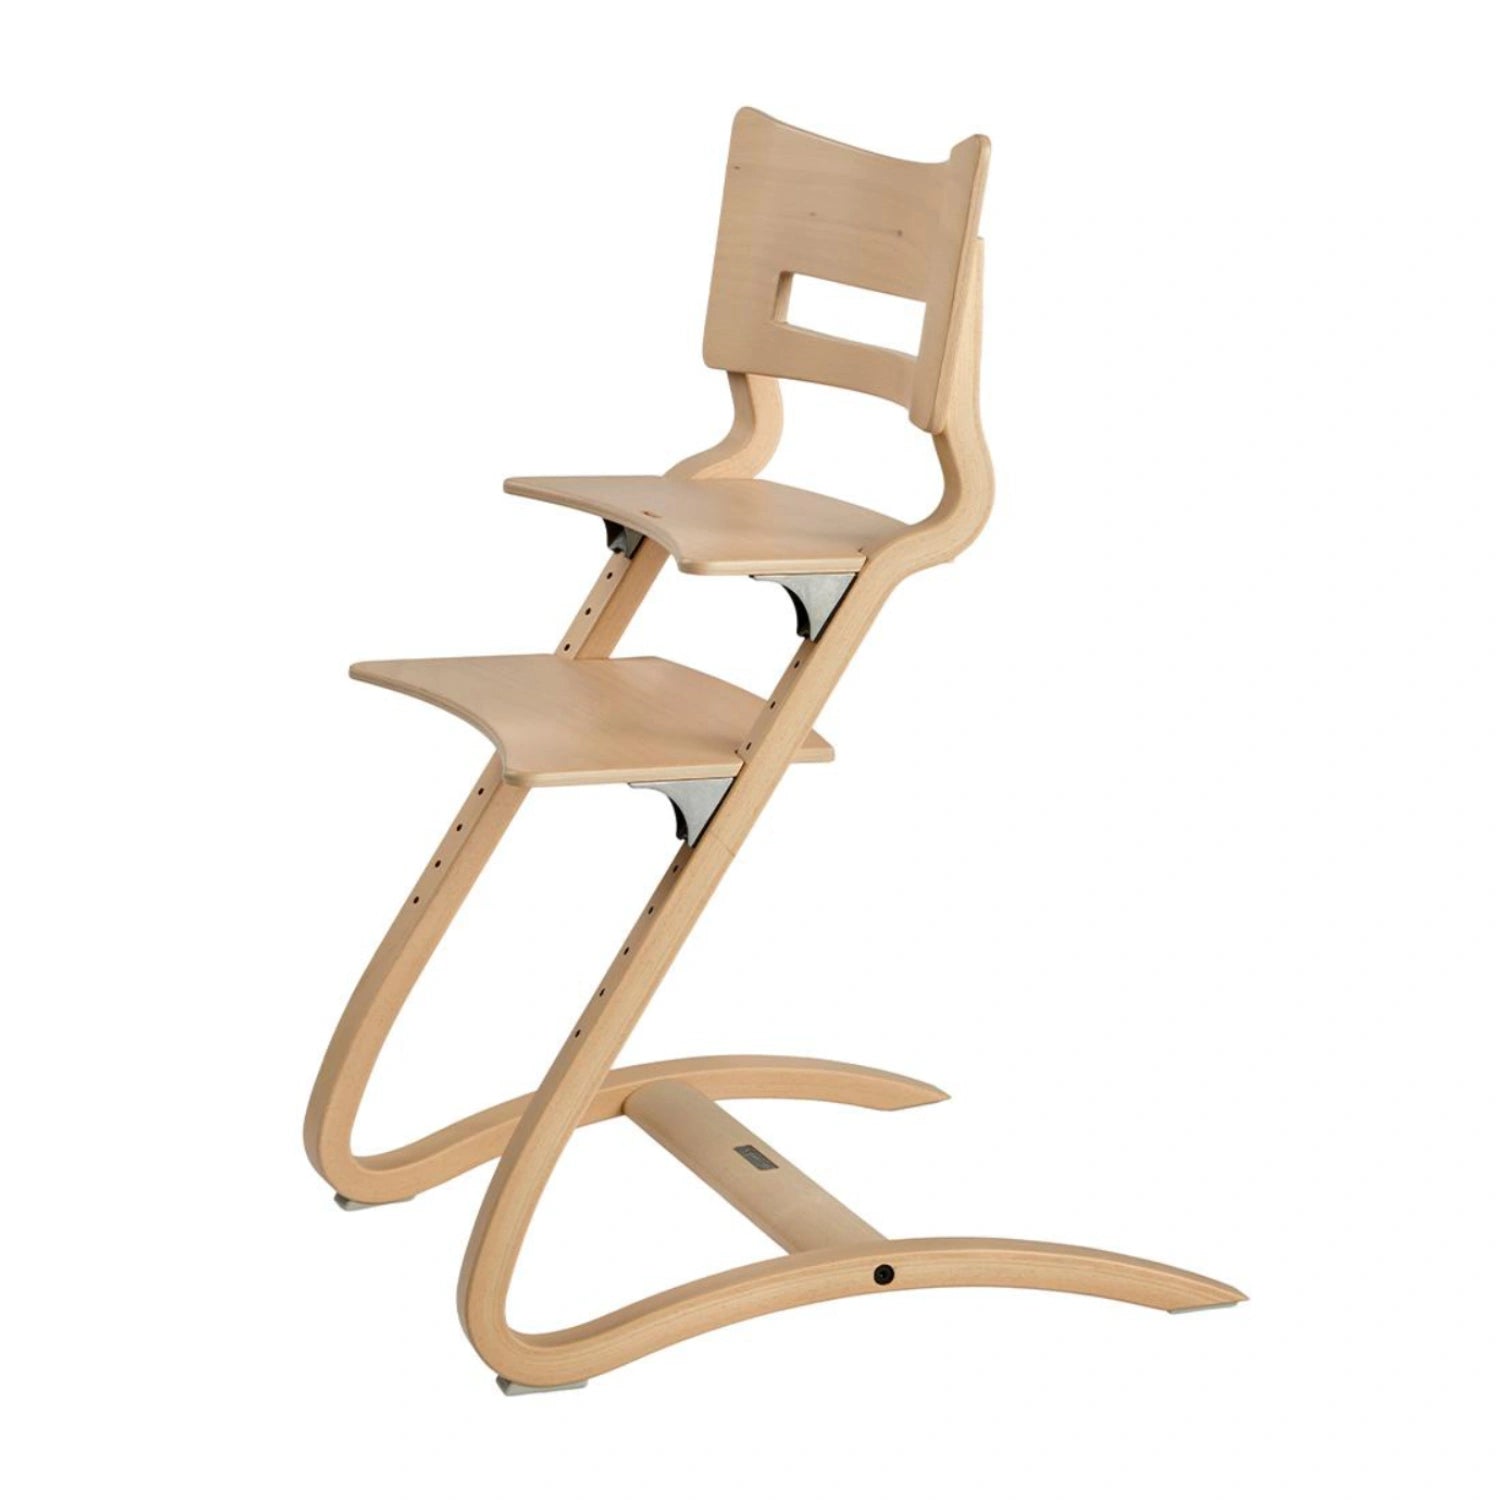 An image of Classic High Chair - Leander Natural Wooden Chair -Order Now